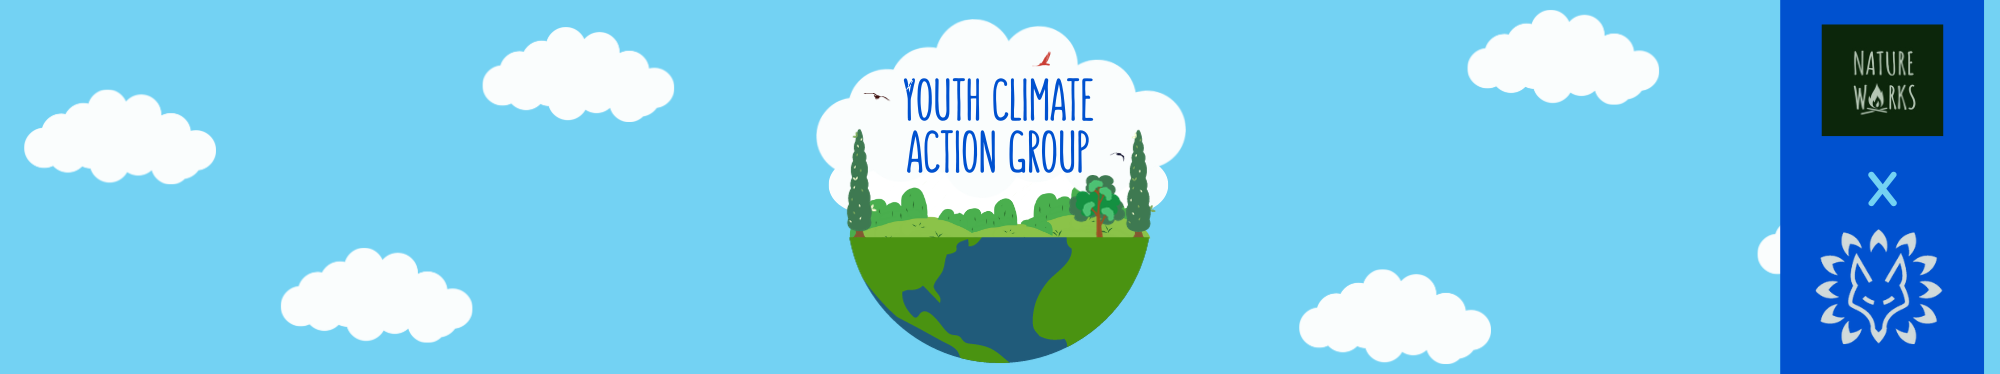 Youth Climate Action Group